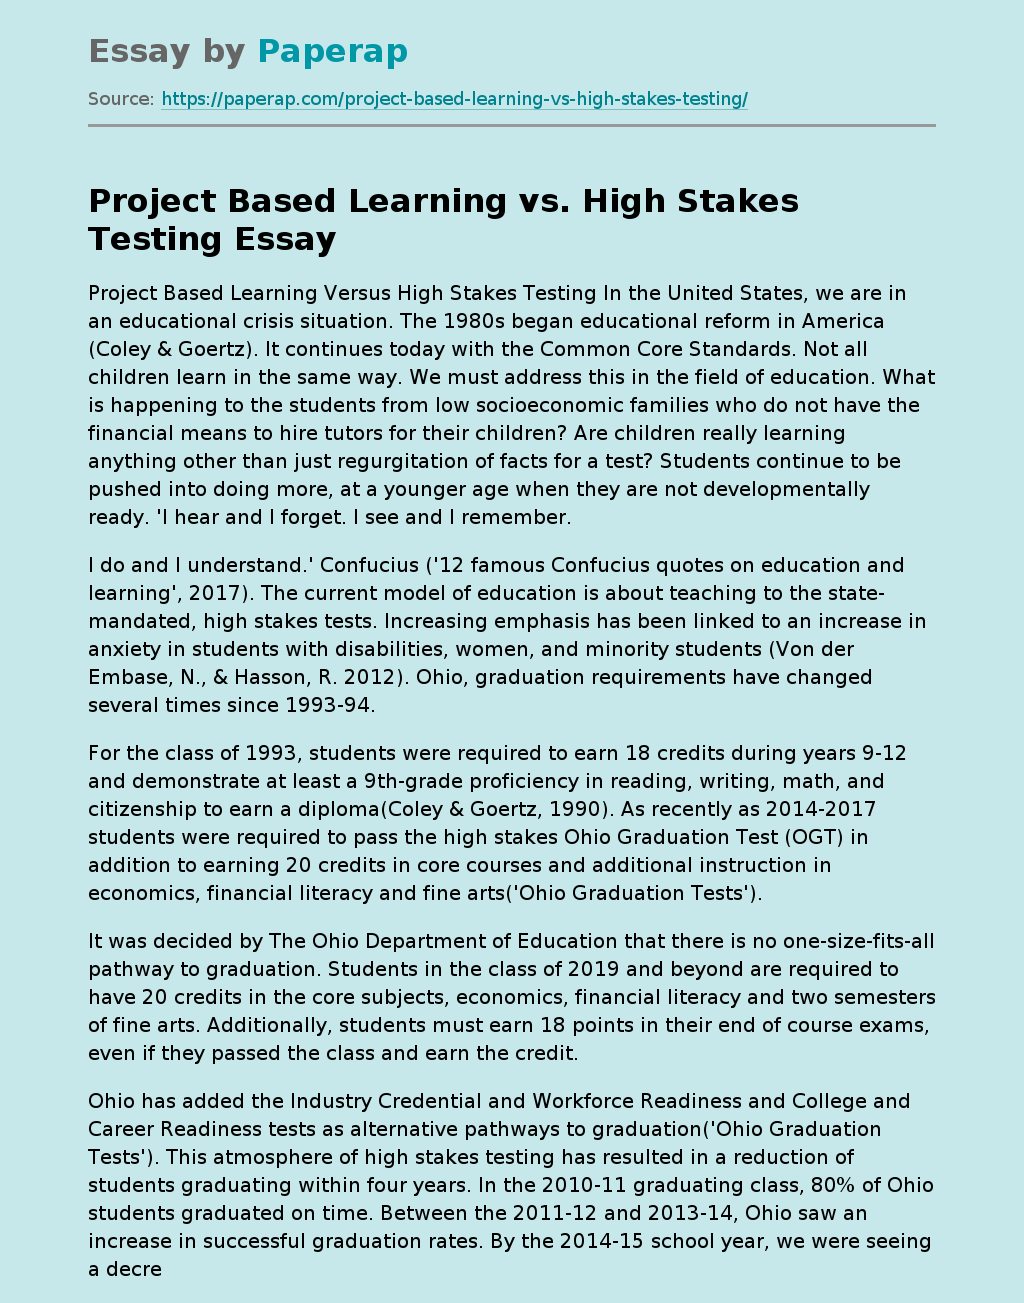 Project Based Learning vs. High Stakes Testing